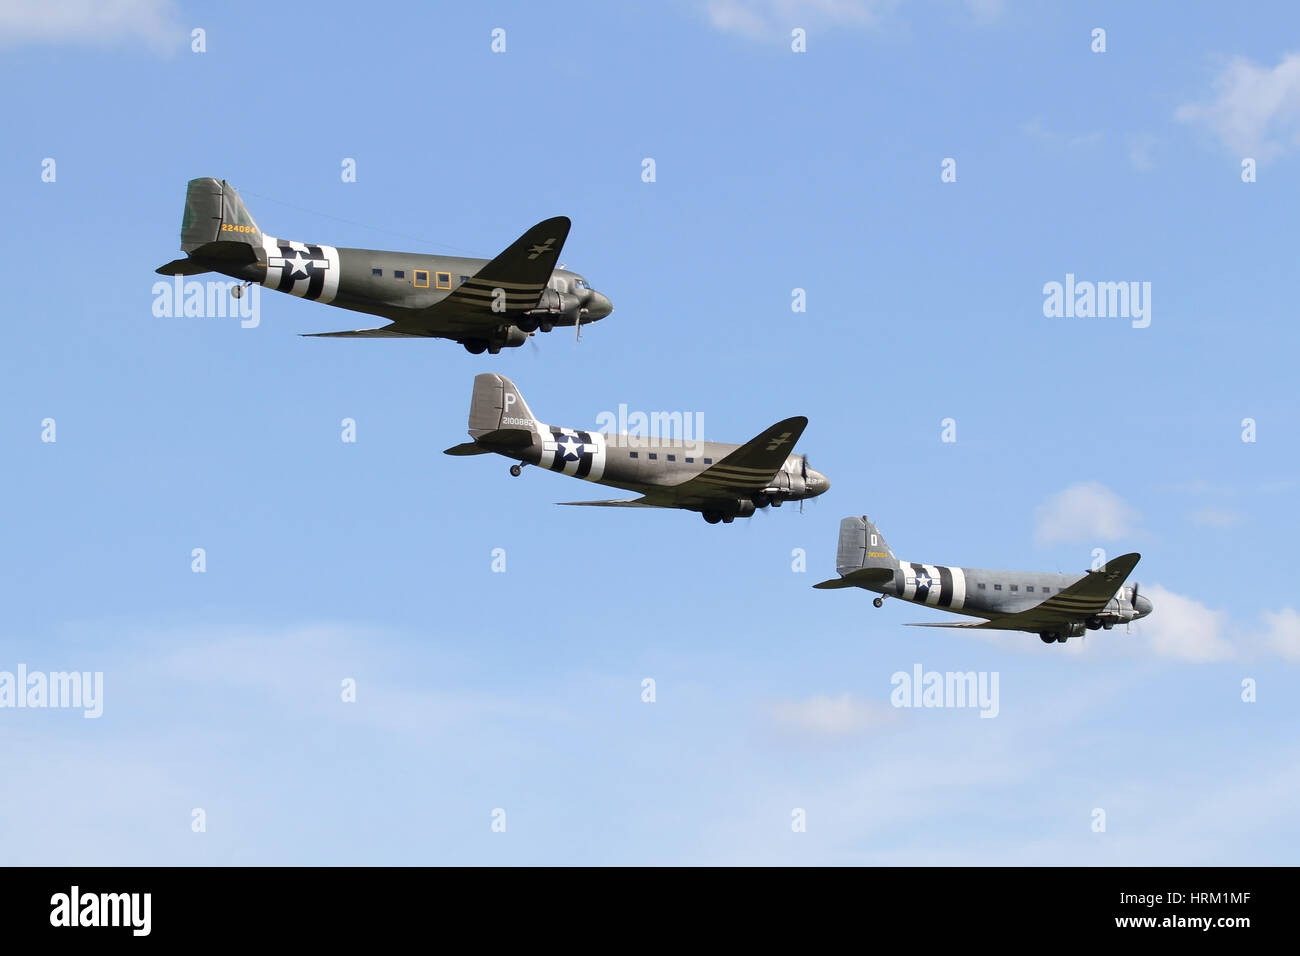 A formation of three Douglas DC-3/C-47s at the 70th anniversary of D-Day airshow hosted by Duxford in 2014. Stock Photo